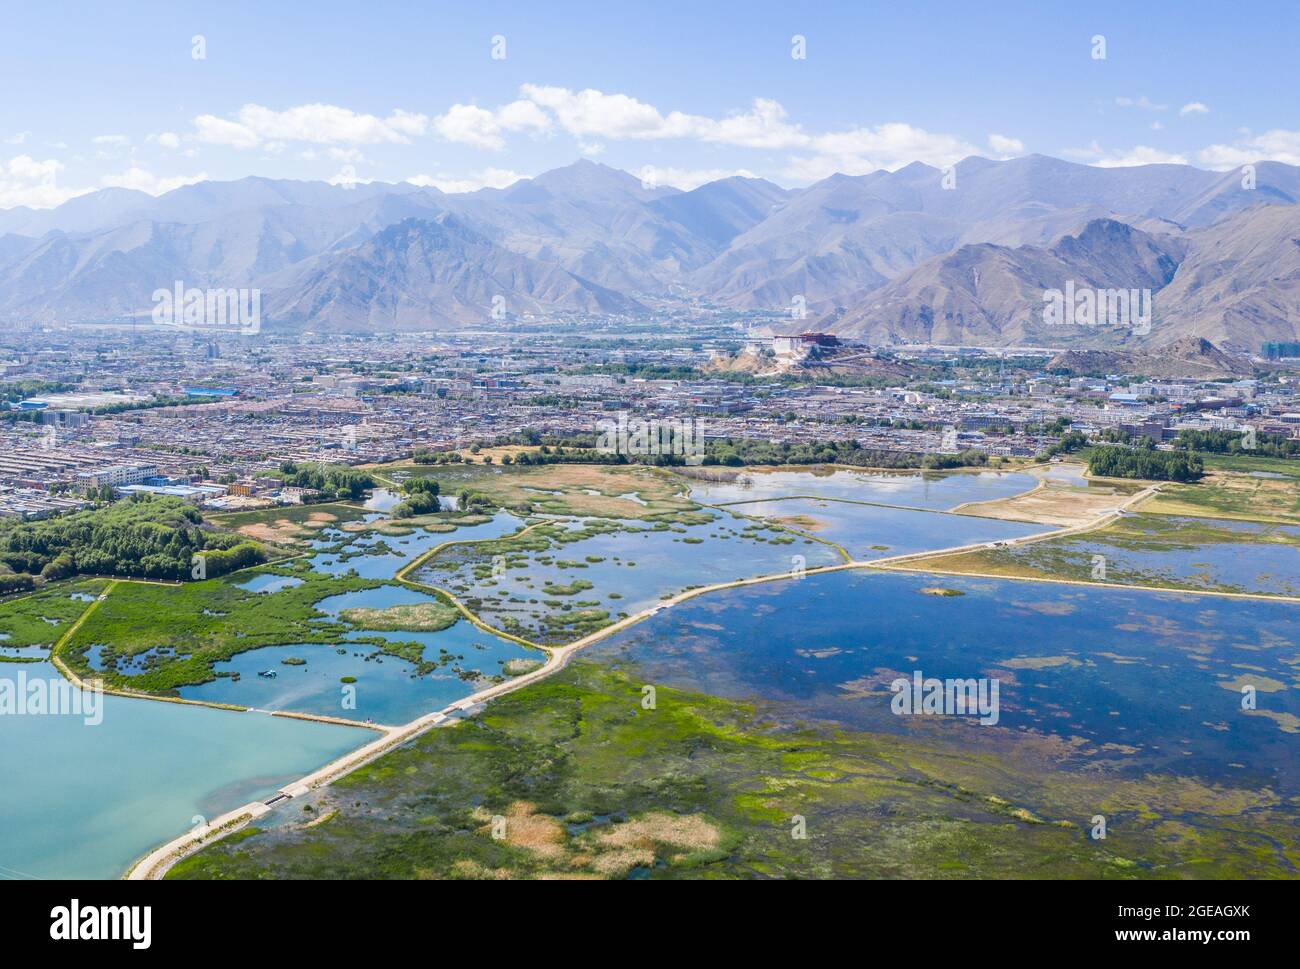 (210818) -- LHASA, Aug. 18, 2021 (Xinhua) -- Aerial photo taken on June 5, 2019 shows a view of Lhalu Wetland National Nature Reserve in Lhasa, southwest China's Tibet Autonomous Region. On May 23, 1951, the Agreement of the Central People's Government and the Local Government of Tibet on Measures for the Peaceful Liberation of Tibet (17-Article Agreement) was signed, officially proclaiming the peaceful liberation of Tibet. The year 2021 marks the 70th anniversary of the historic event. (Xinhua/Purbu Zhaxi) Stock Photo